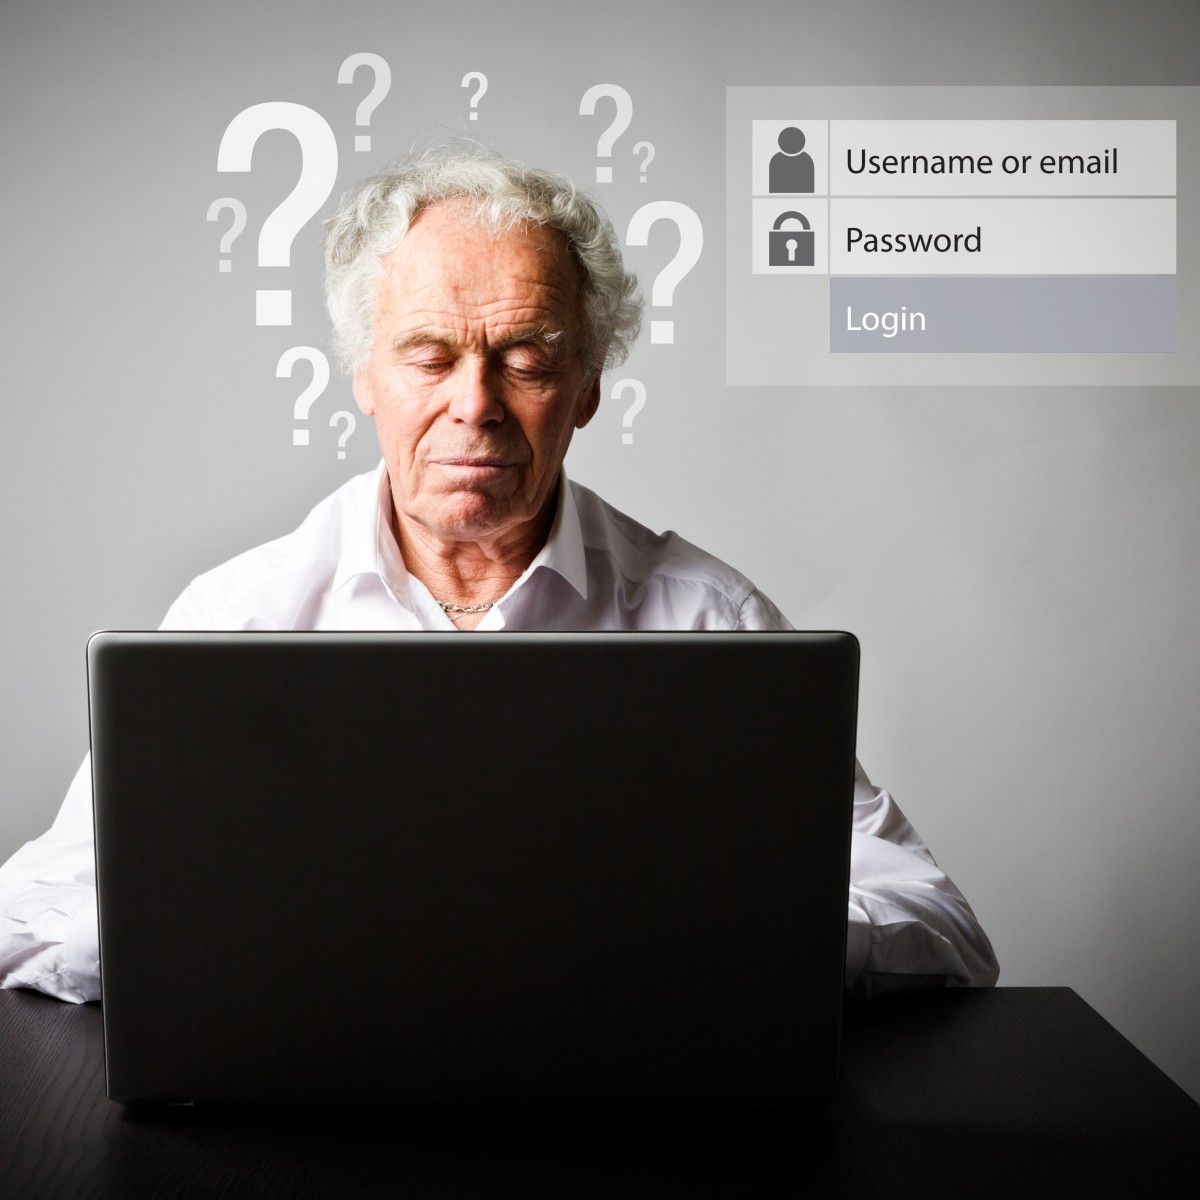 An older man sits at a laptop trying to remember his username and password